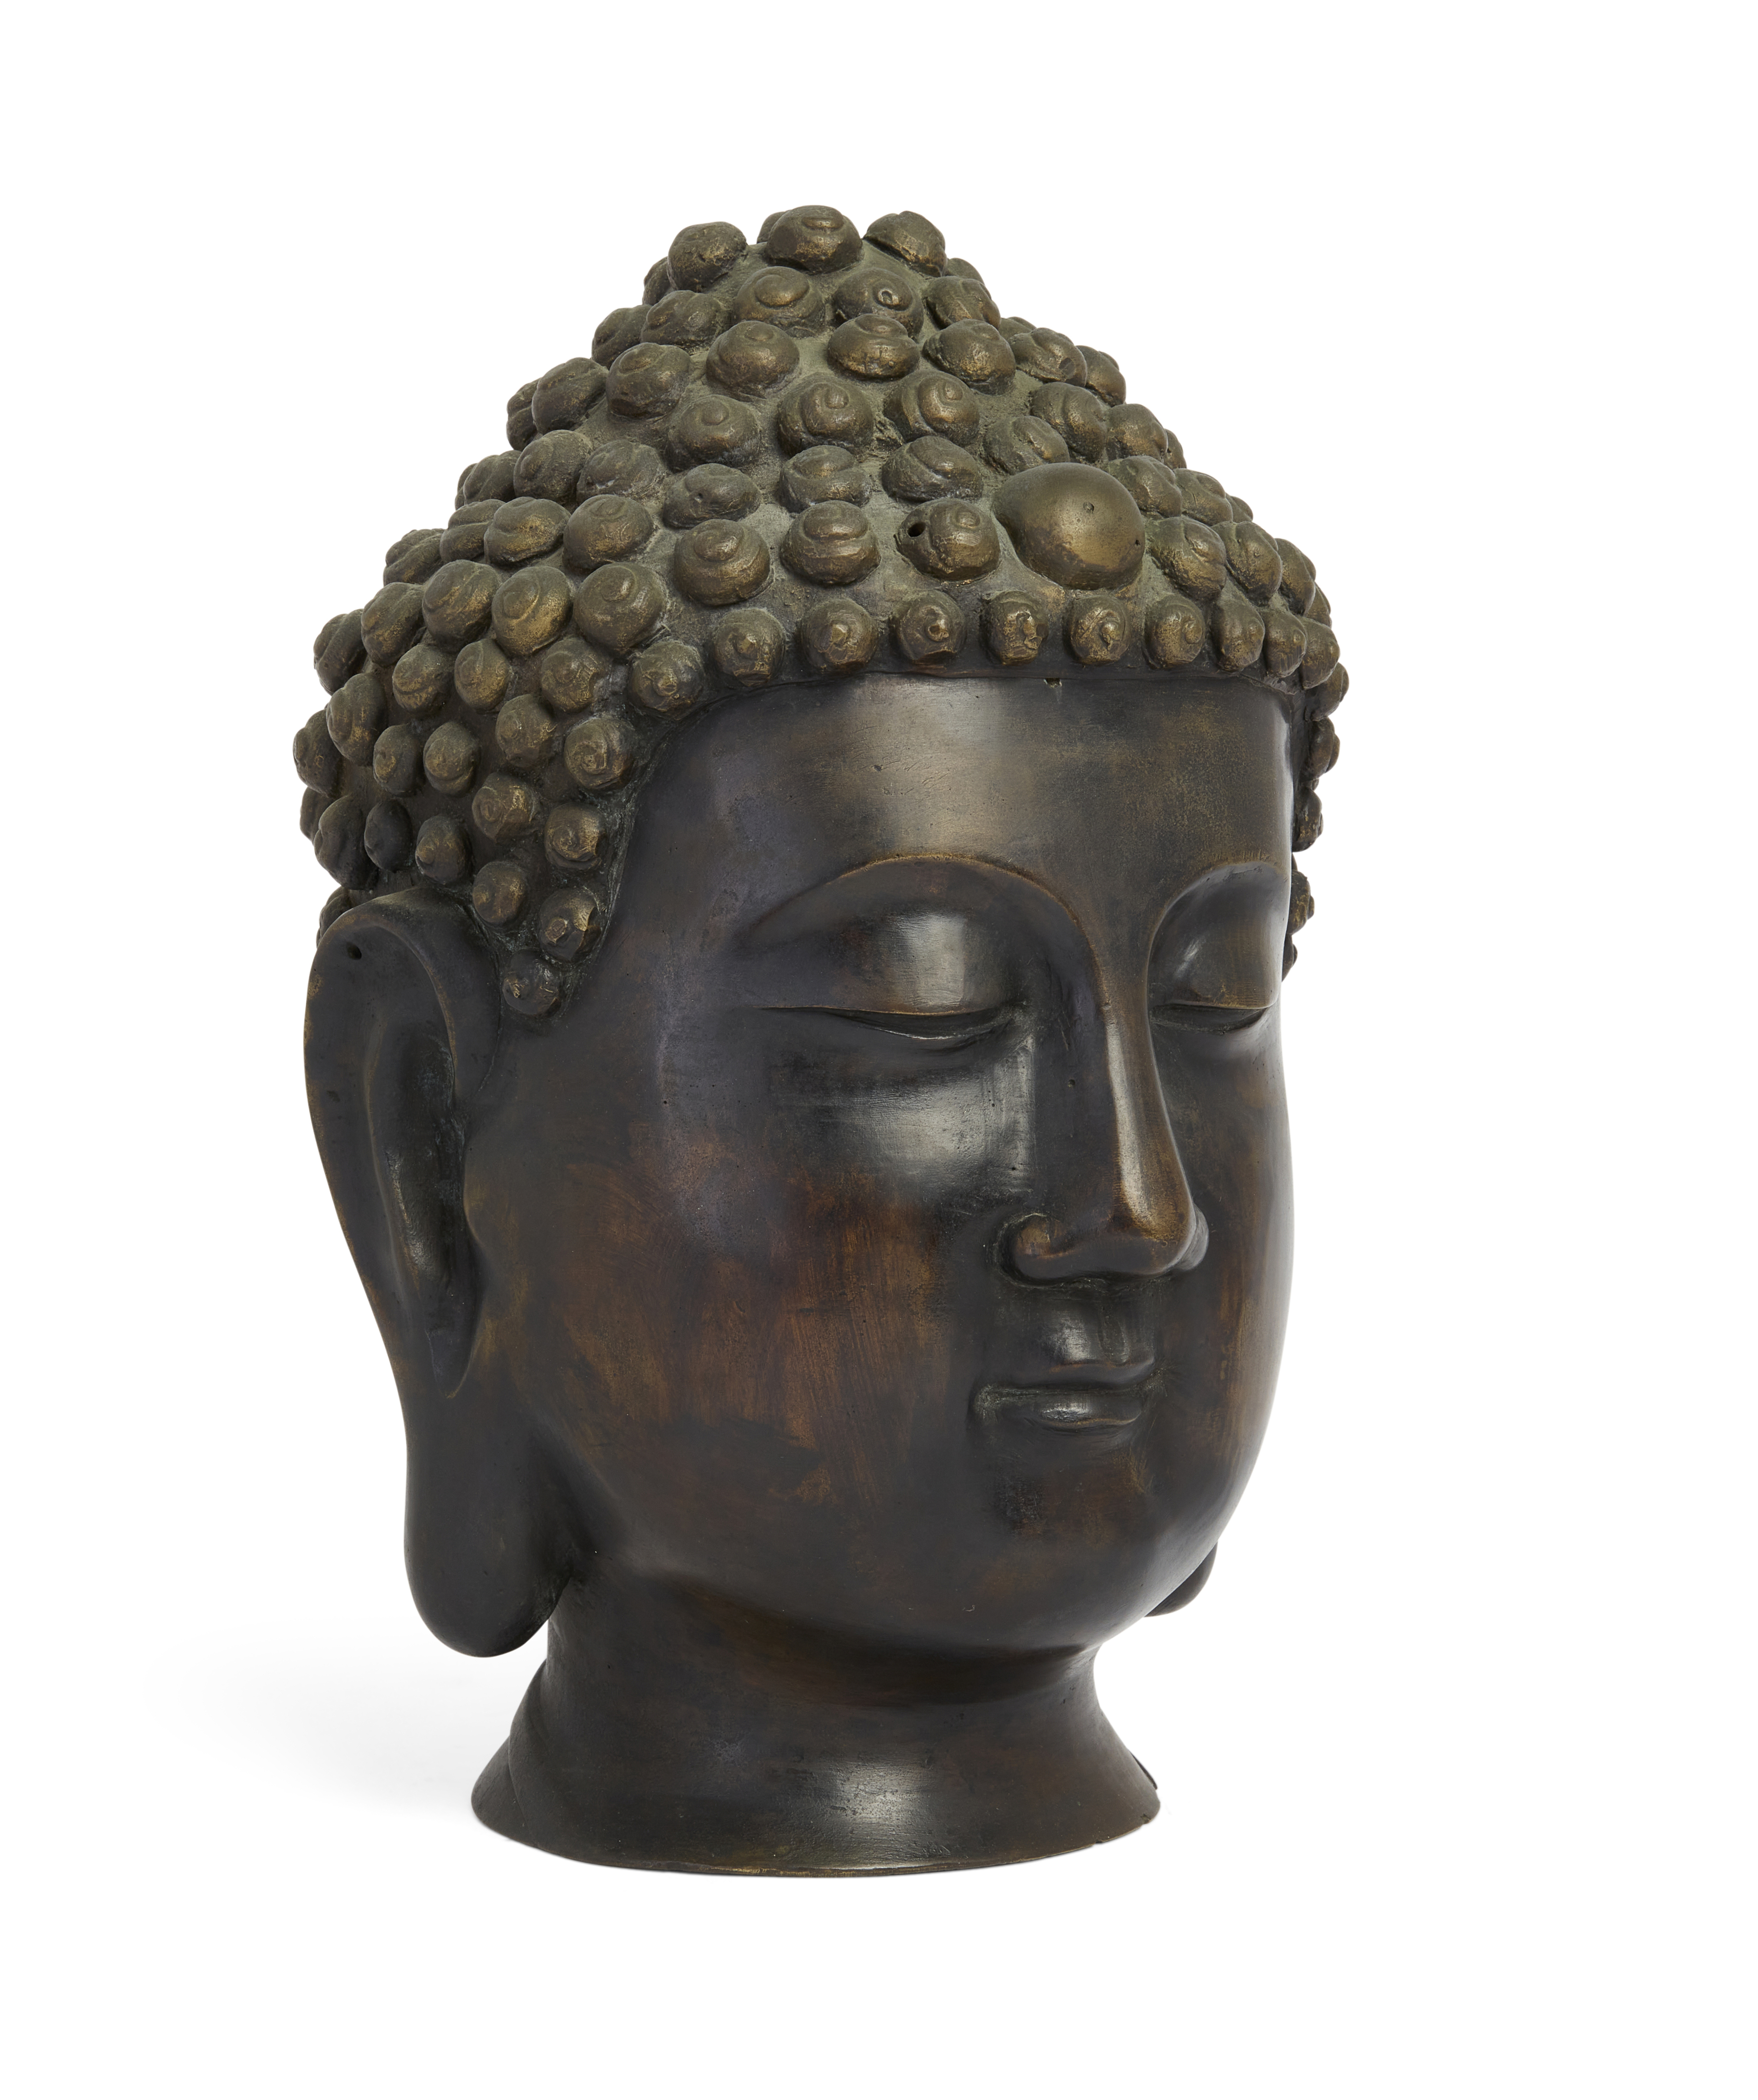 A large Thai bronze head of Buddha, Early 20th century, 30cm high - Image 2 of 2